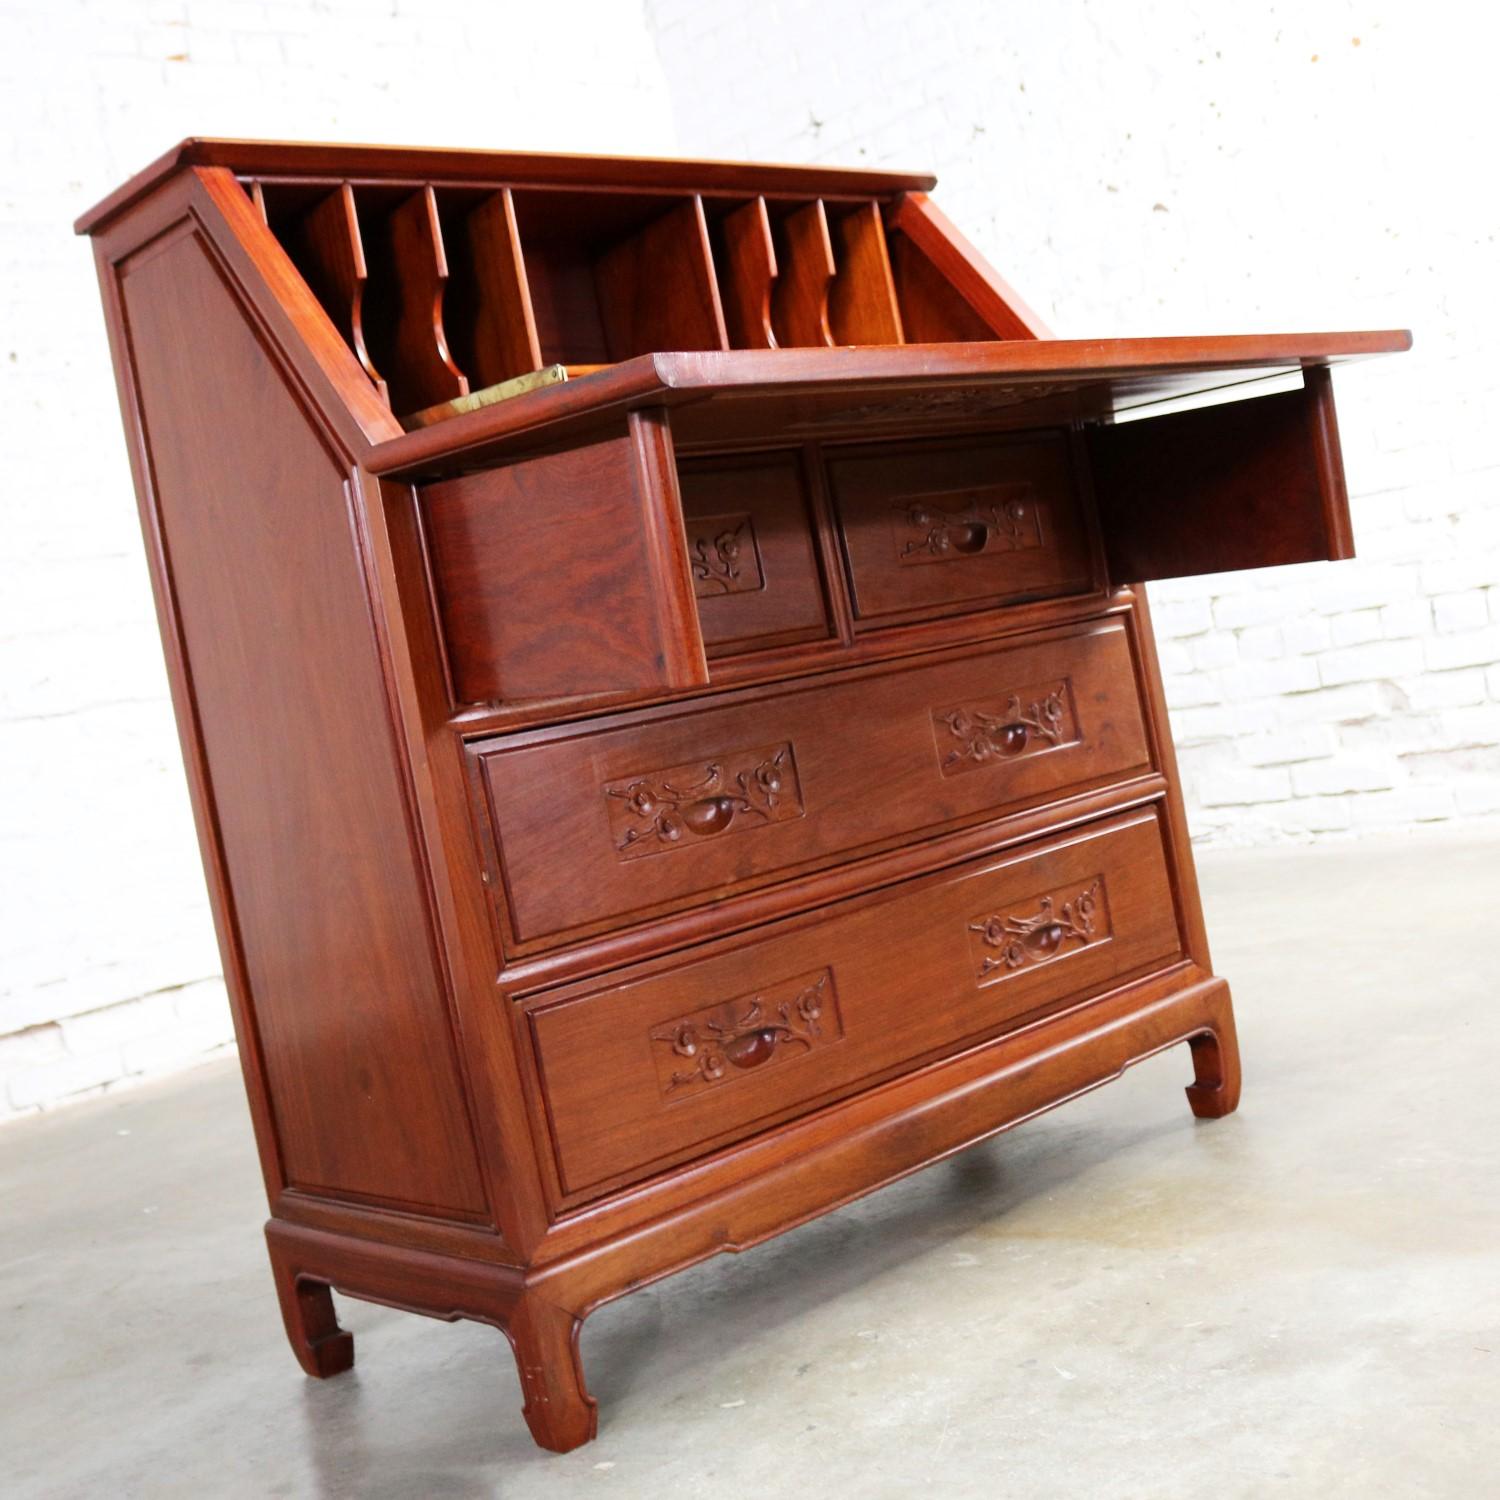 20th Century Asian Teak Hand Carved Drop Front Compartmentalized Desk Style of George Zee For Sale